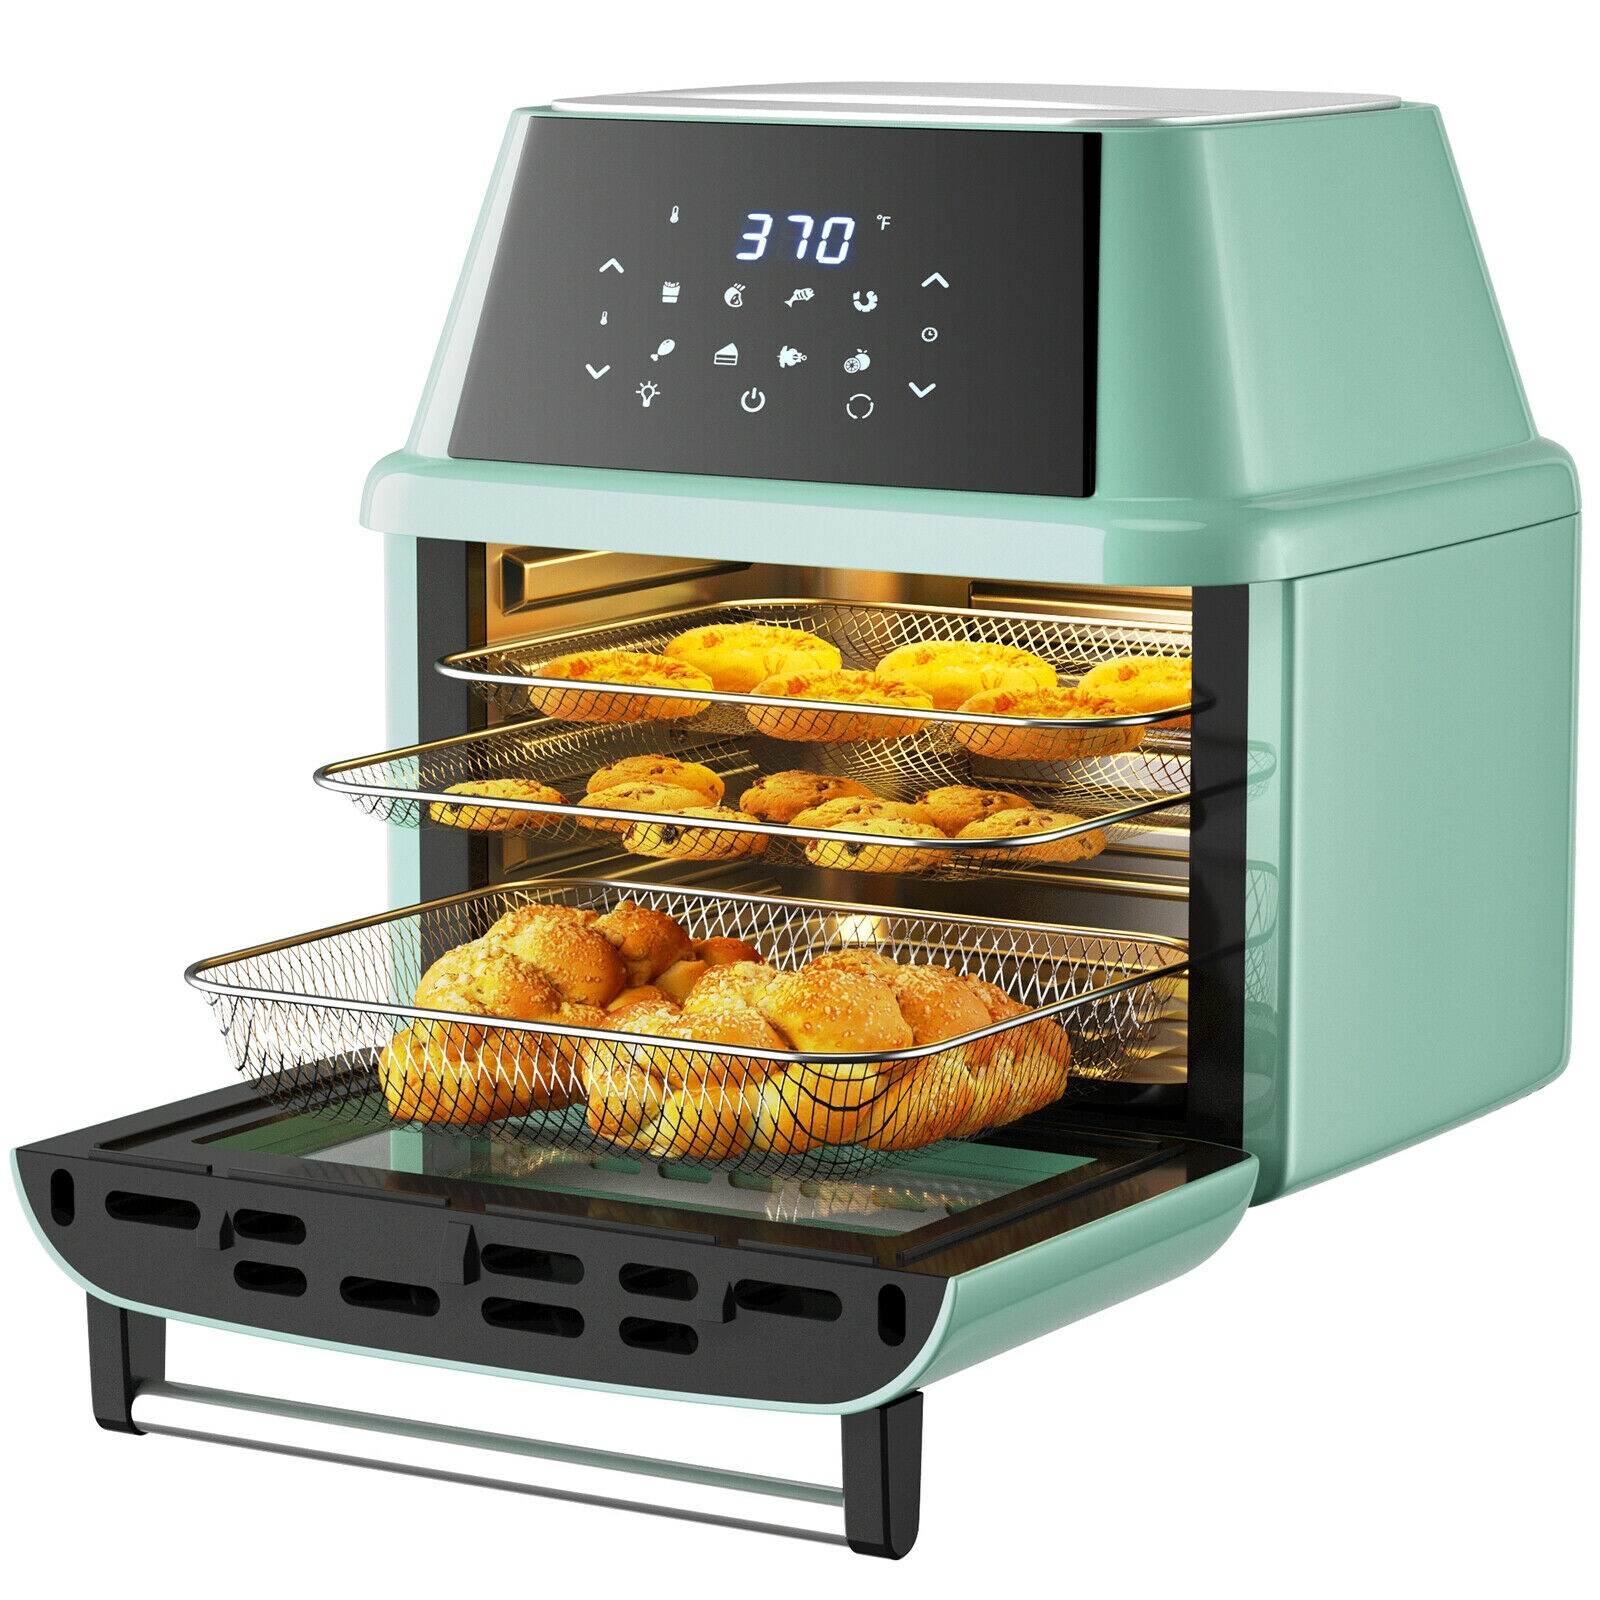 Pro Breeze 12.7 Quart Air Fryer Oven - Large Air Fryer Toaster Oven, 12 Cooking Modes Including Rotisserie & Food Dehydrator, 19 Accessories